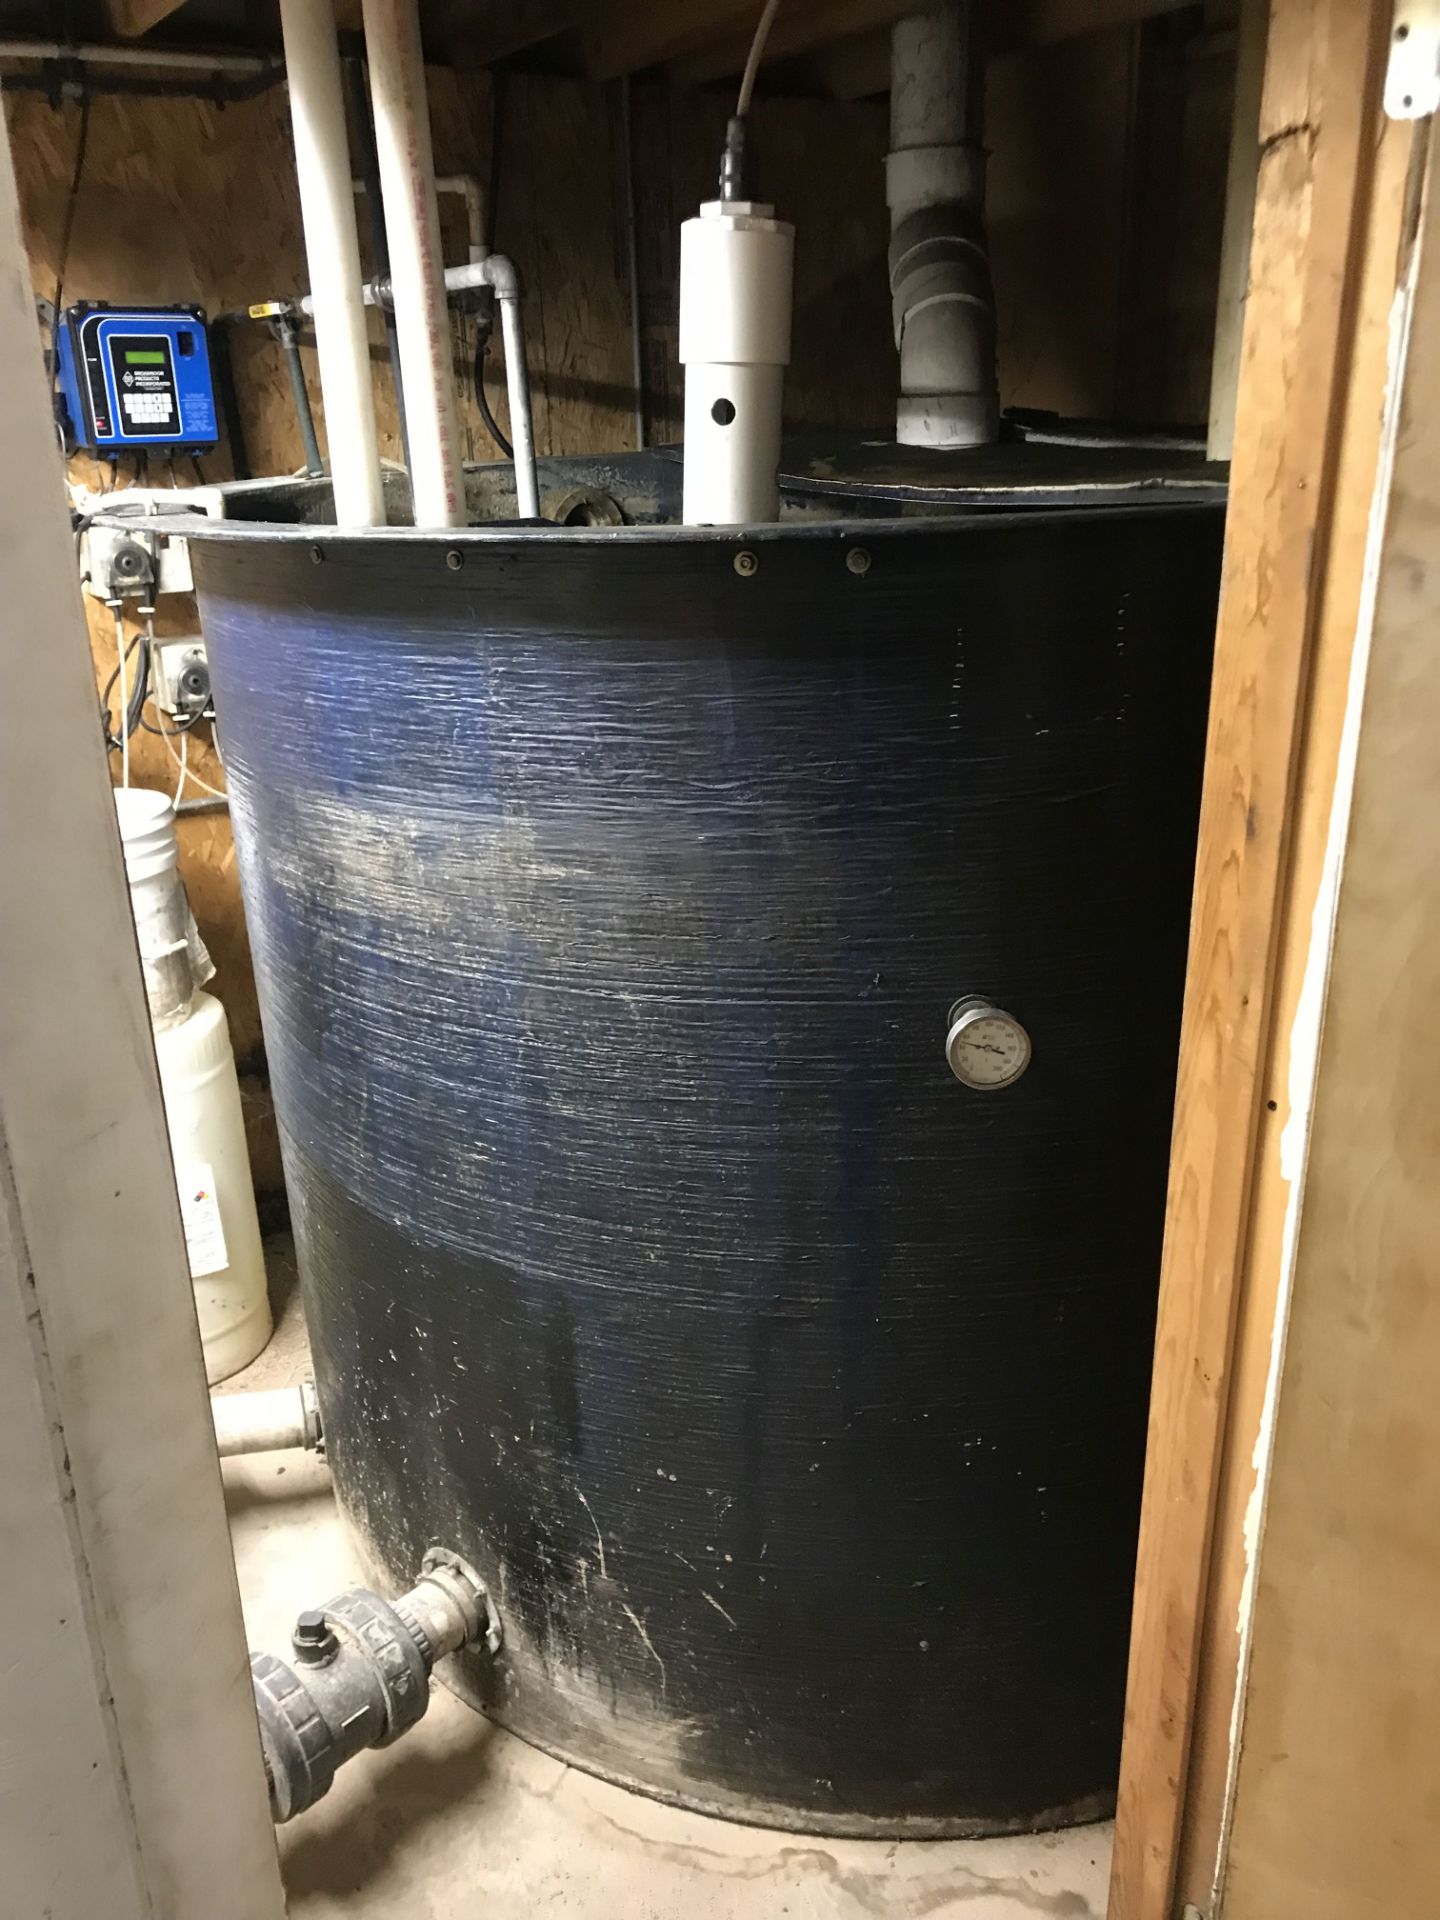 WATER RECIRCULATING SYSTEM, SAID TO BE APPROX 1500 GALLON TANK, WITH CONTROLS, ELECTRIC MOTORS,